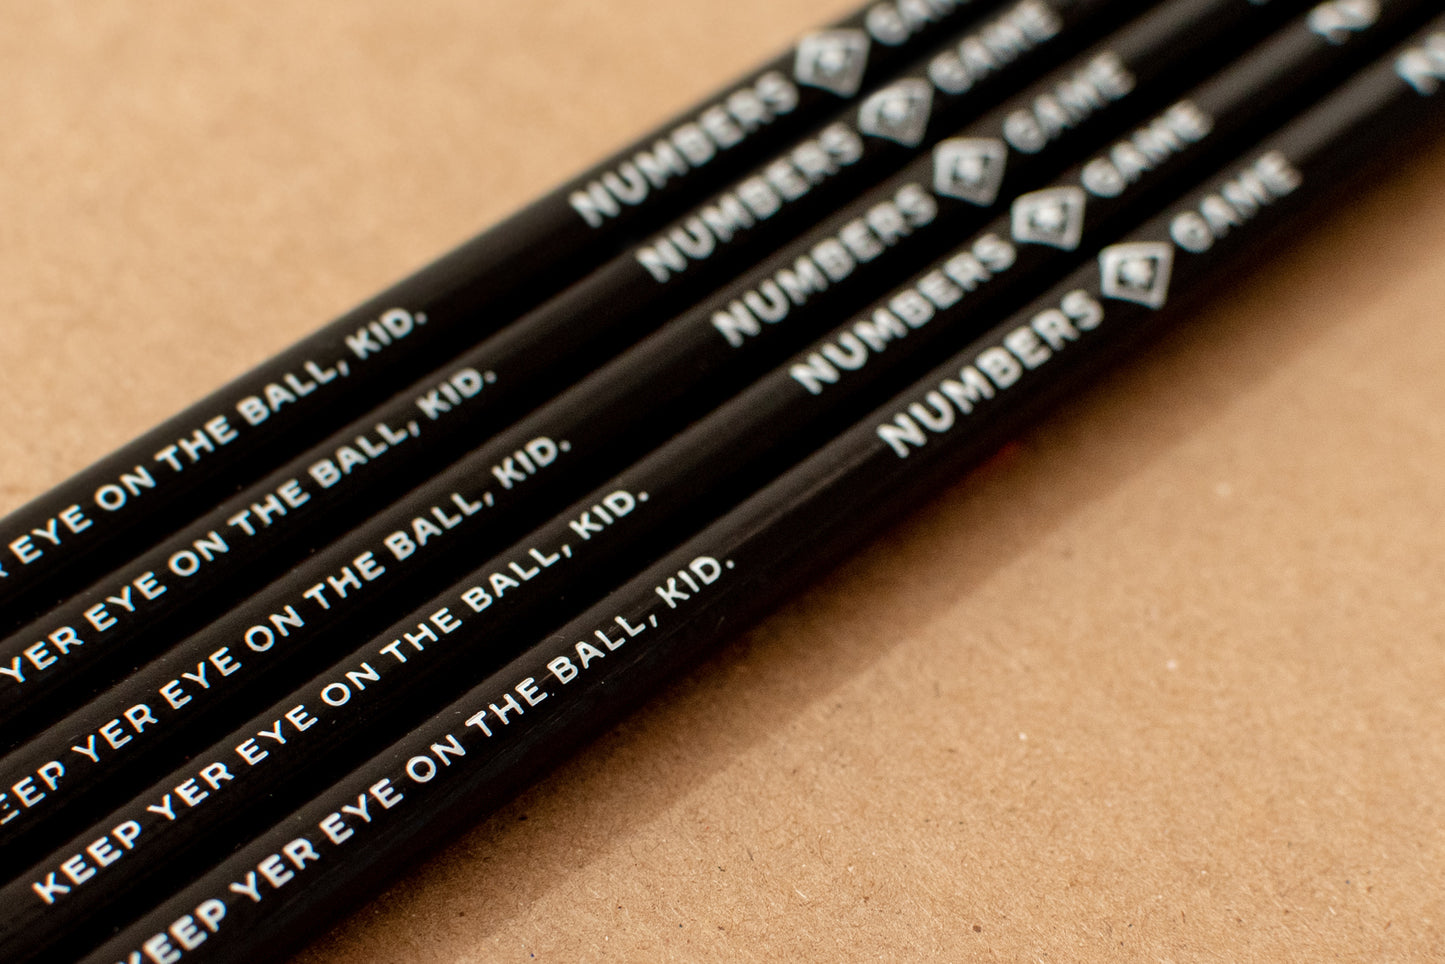 Numbers Game pencils are painted black and feature the Numbers Game brand logo and the phrase, "Keep yer eye on the ball, kid." printed in white.